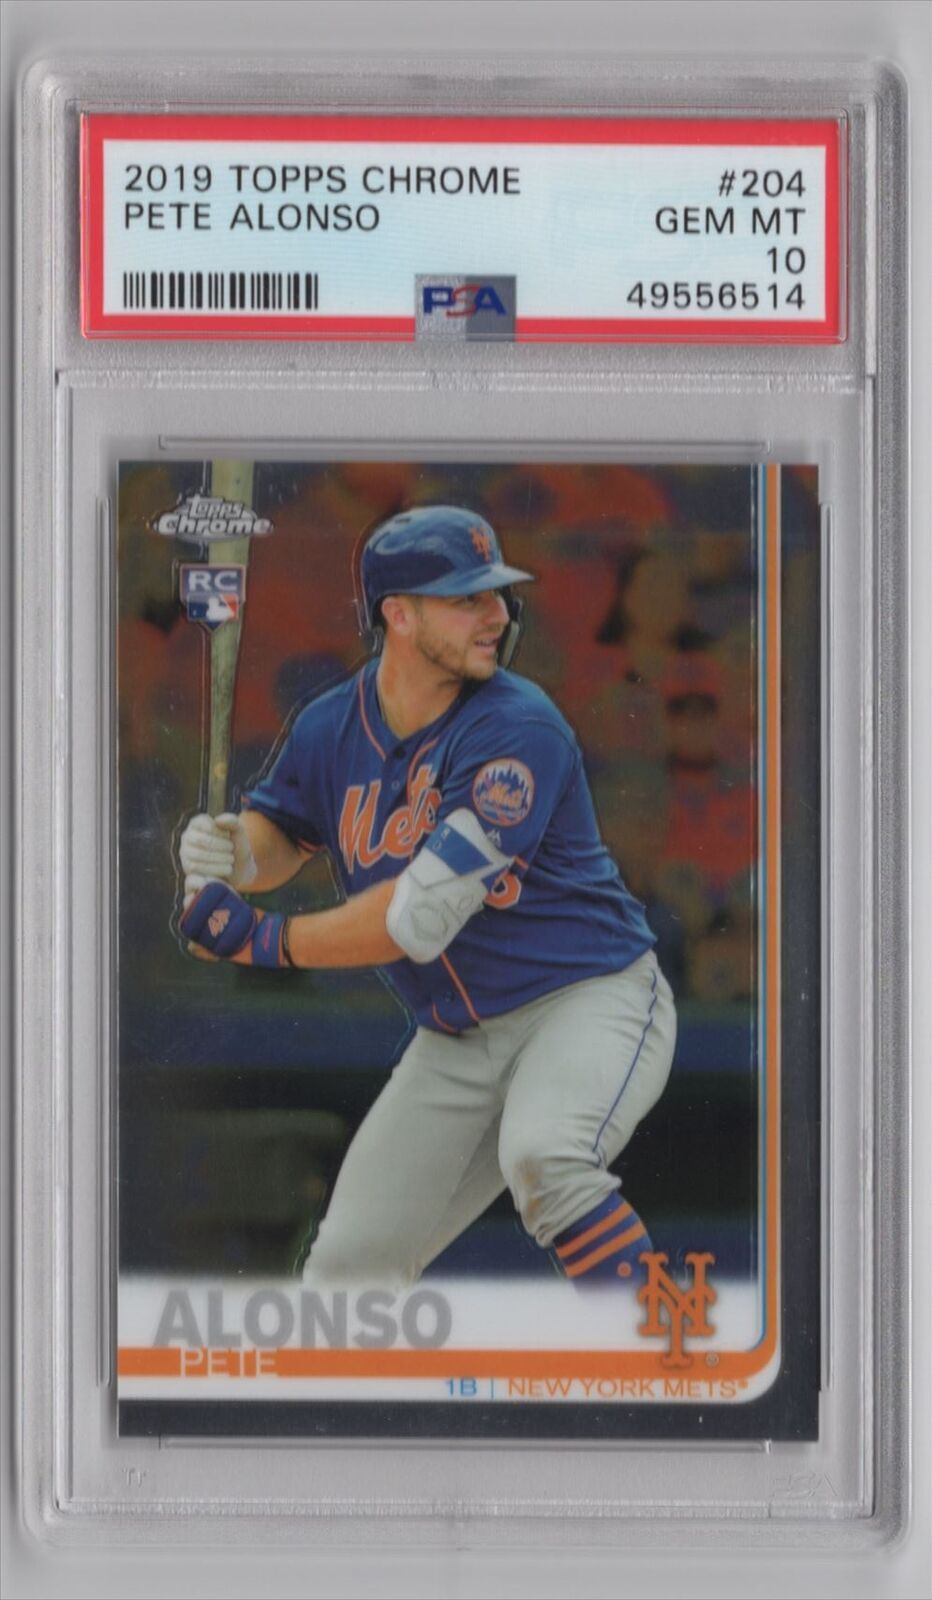 2019 Topps Chrome Pete Alonso RC 49556514 PSA 10 New York Mets #204